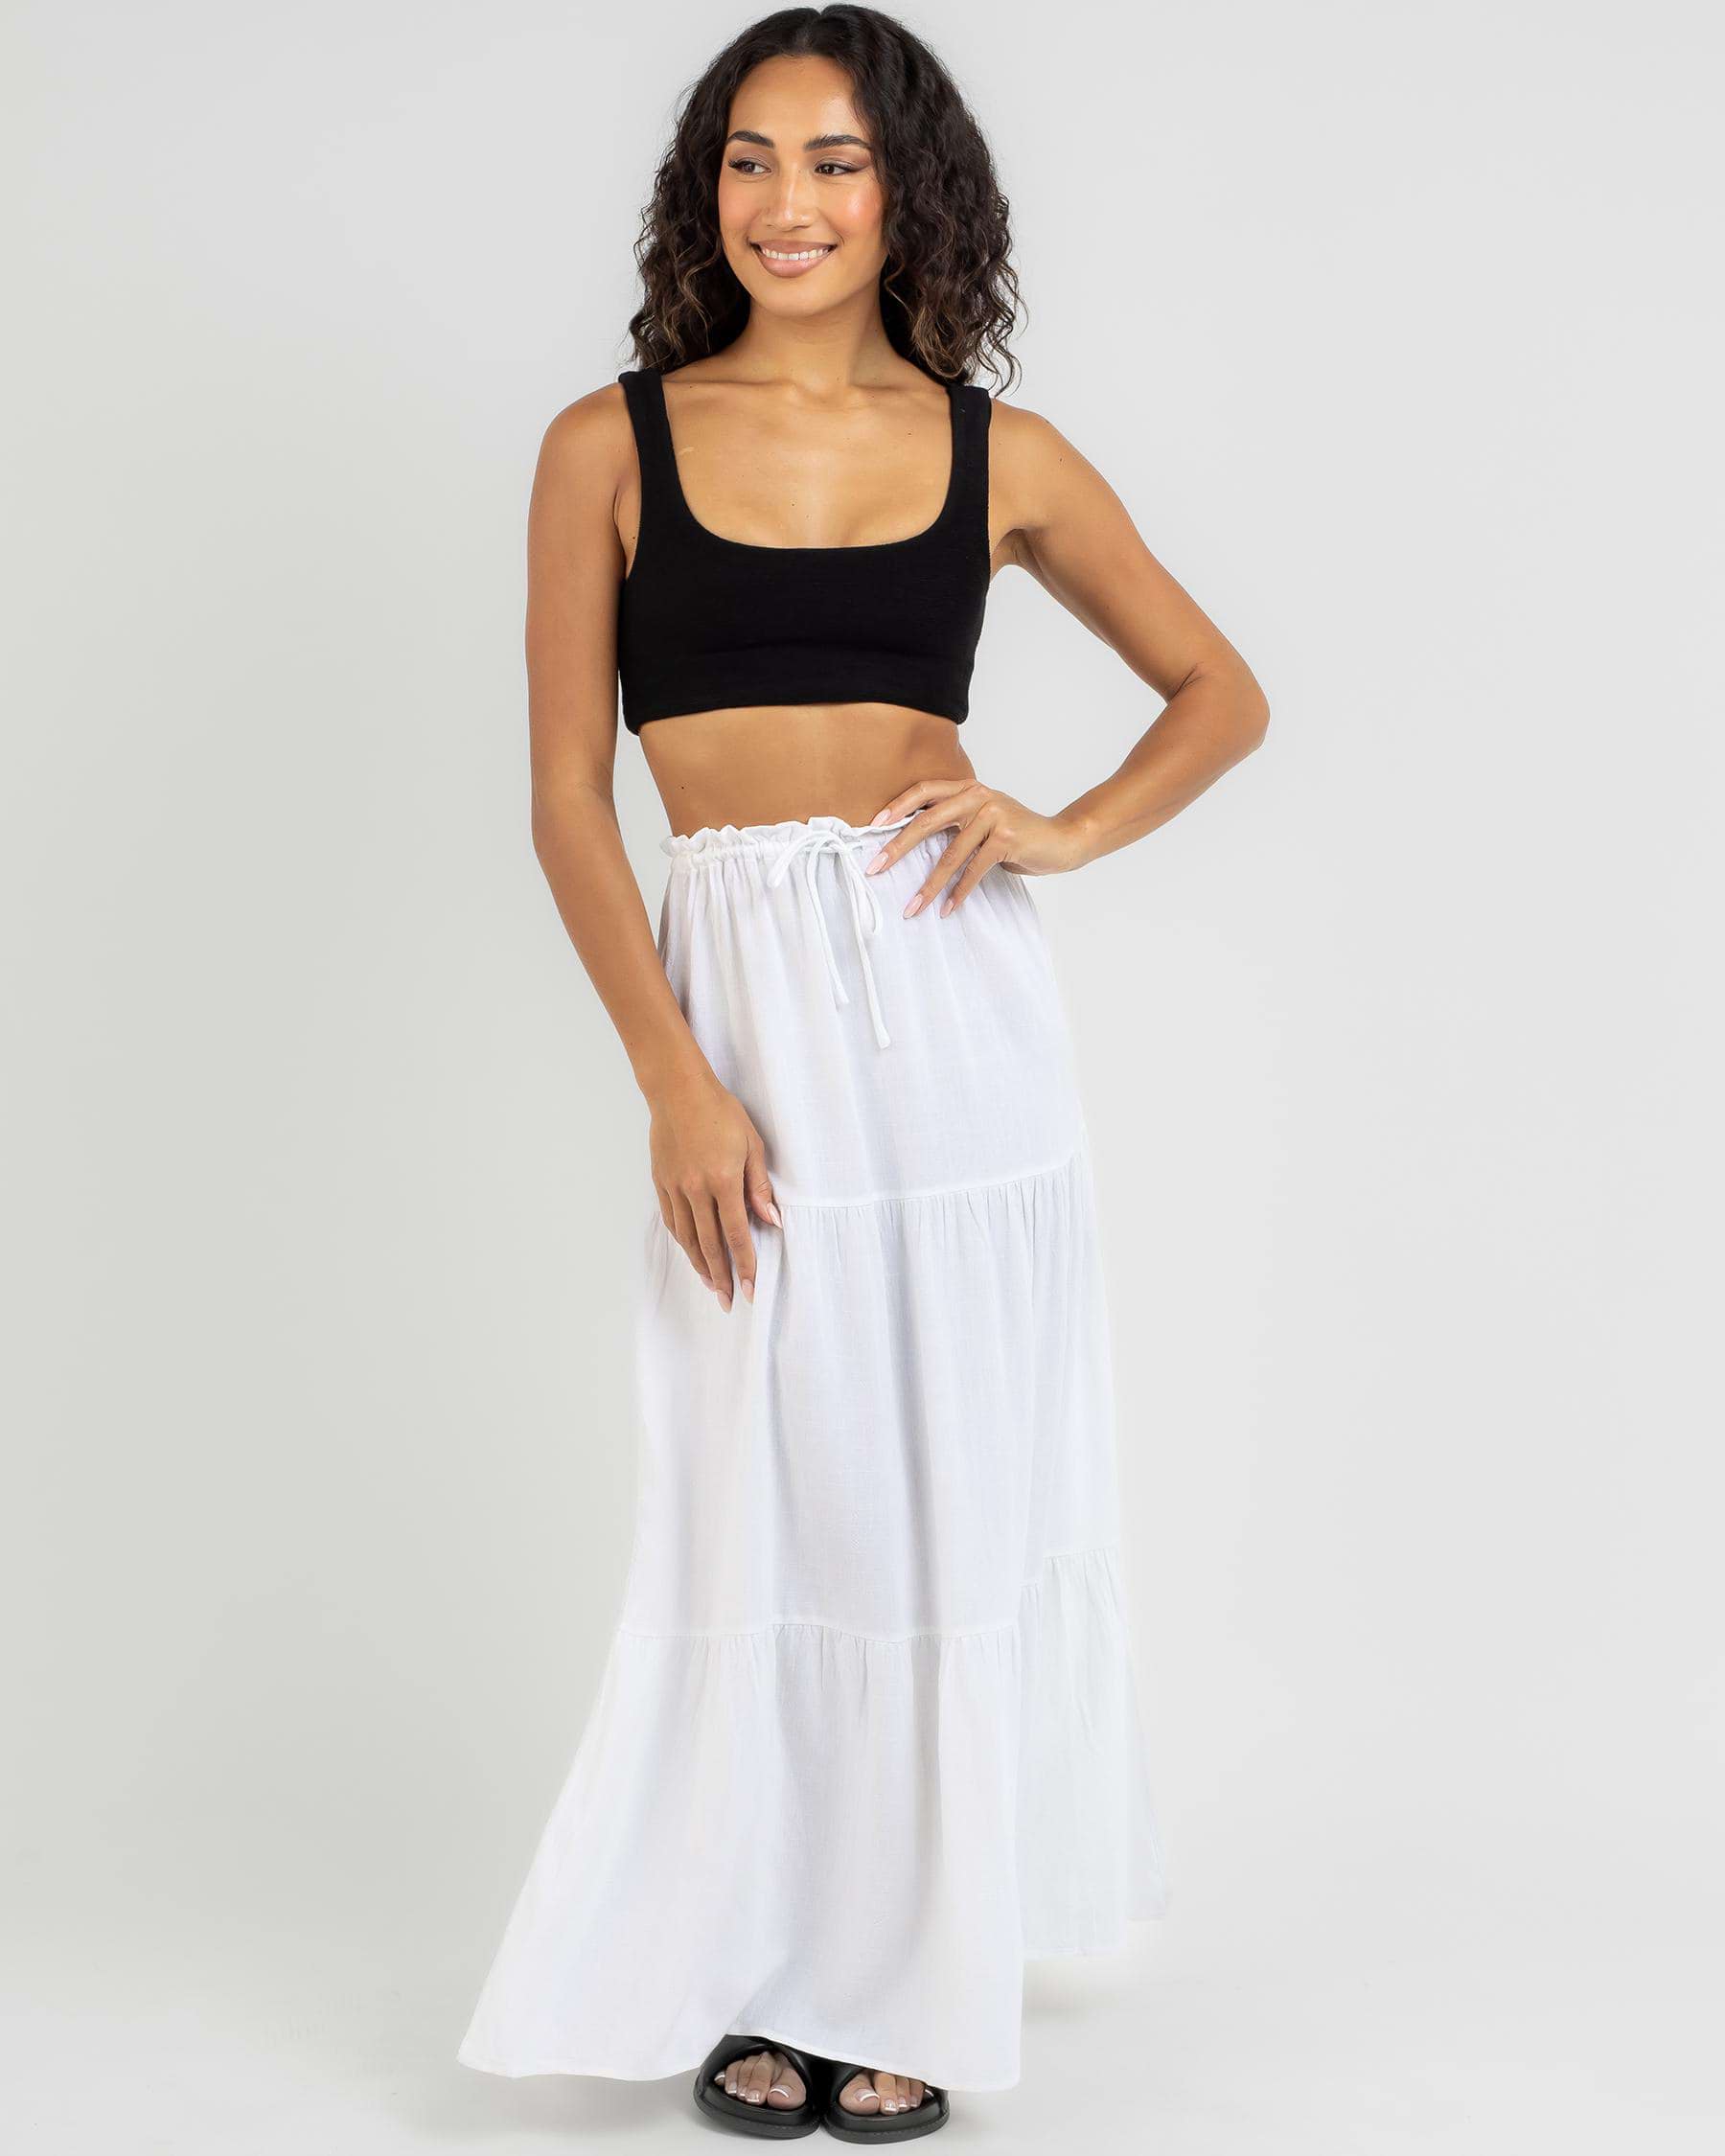 Mooloola Melly Crop Top In Black - Fast Shipping & Easy Returns - City ...